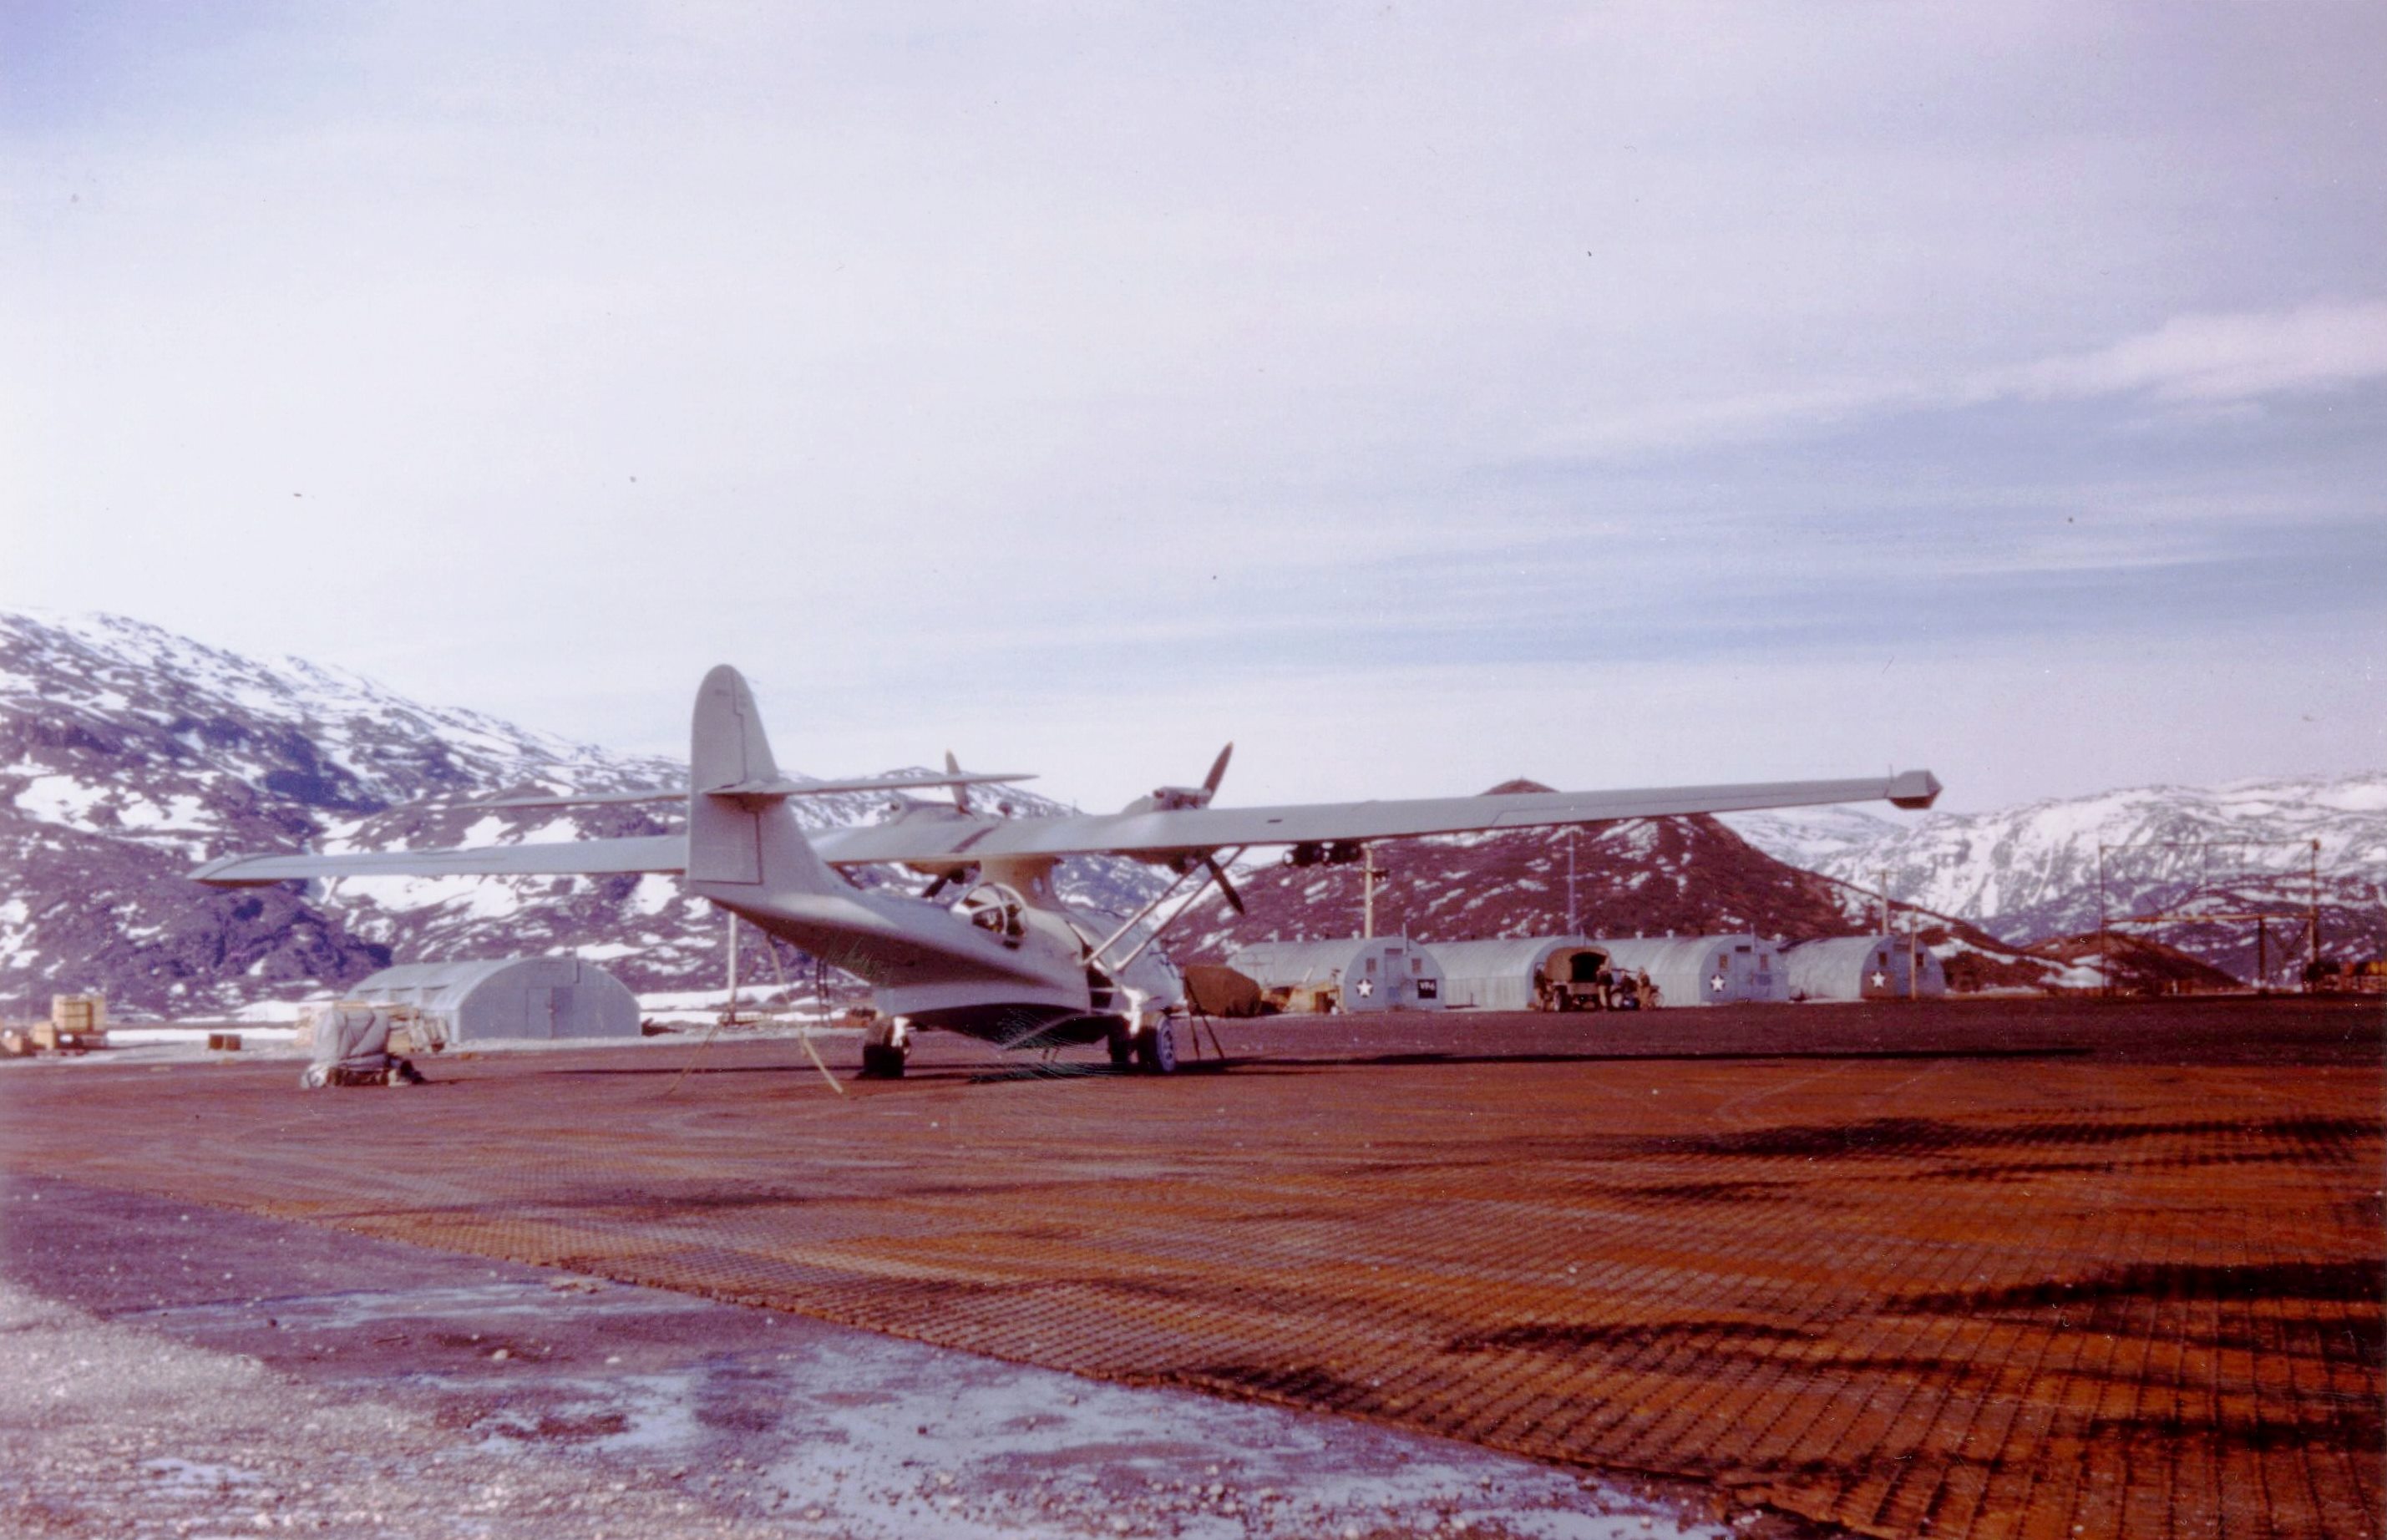 United States Coast Guard PBY-5A Catalina with Patrol-Bombing Squadron 6 on the ramp at Bluie West One air strip, Narsarssuak, Greenland (now Narsarsuaq), 1943.